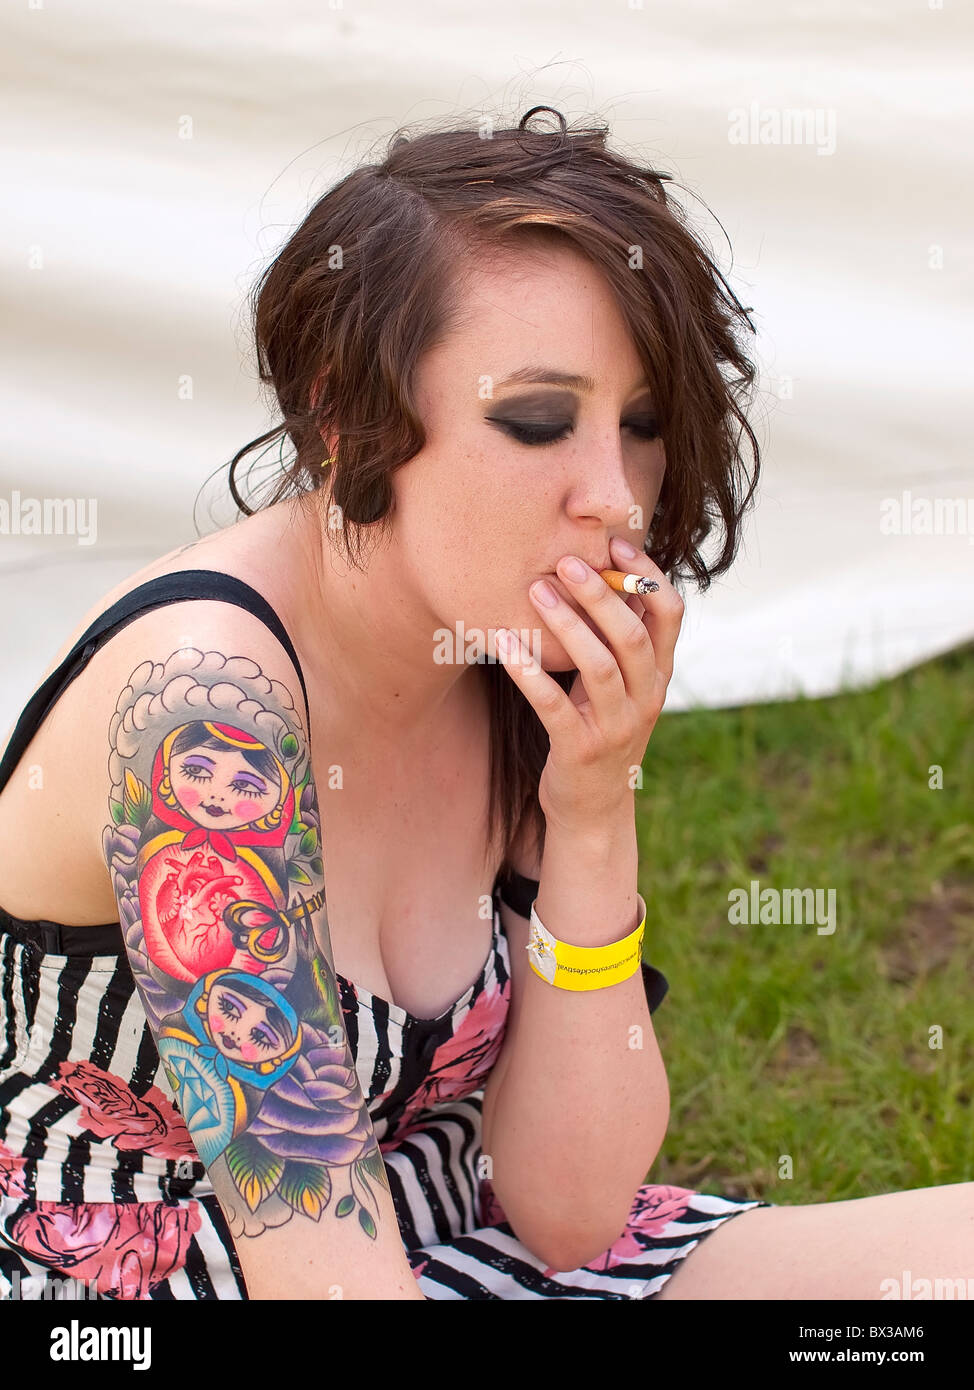 Lucy a trendy young female adult nineteen year old with tattoos drawing on a cigarette Stock Photo